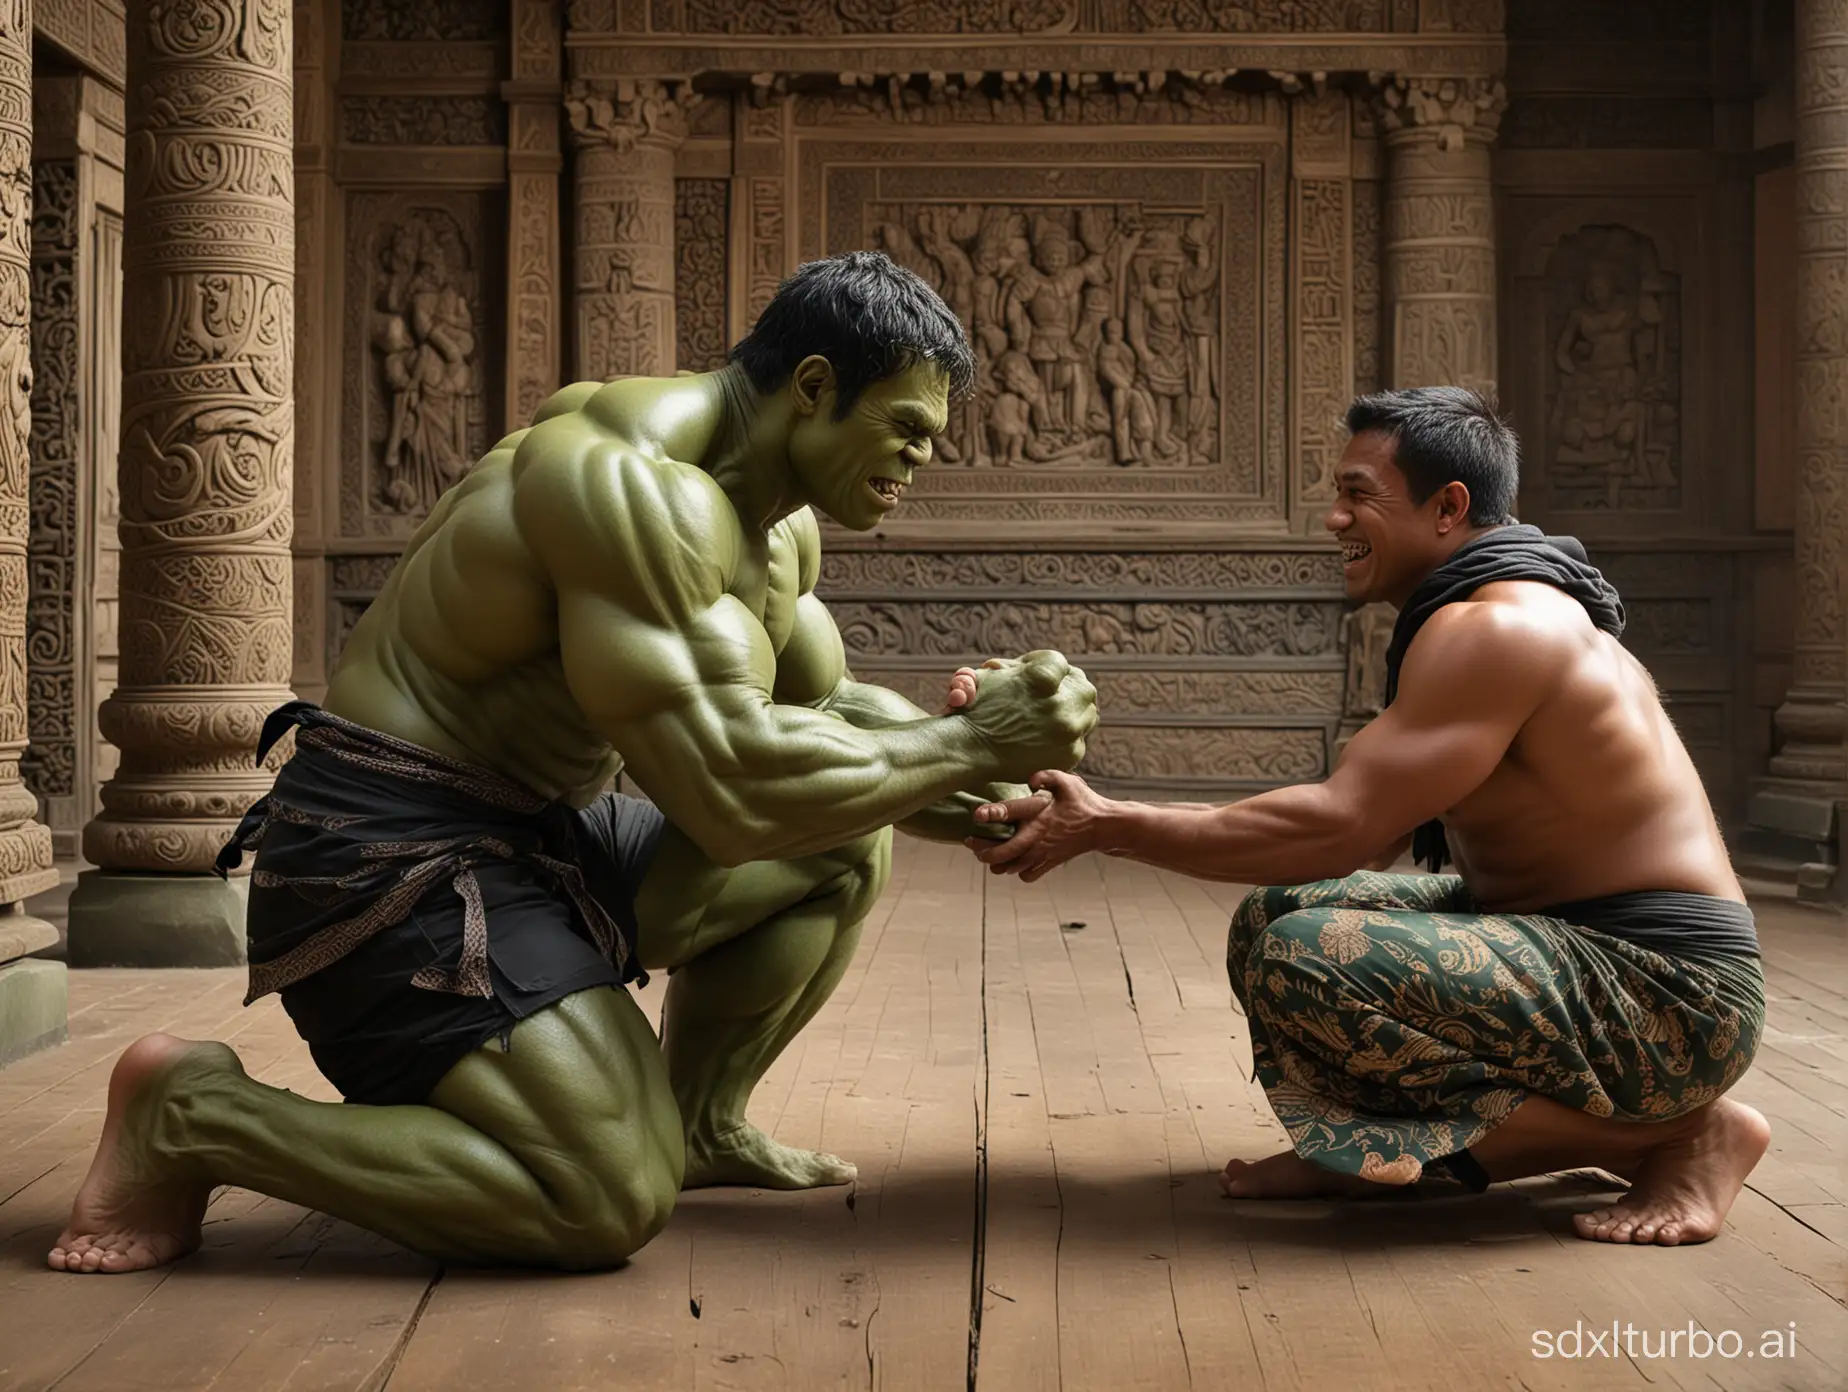 HULK bowed while crying, his tears flowing freely and pooling on the floor, with his legs bent on the floor and his hands shaking hands with a 30-year-old Indonesian man wearing a black hoodie with the inscription "Cak Wanto", wearing a green-patterned sarong. The man sat on a carved wooden bench while stroking the head of the crying Hulk. The background is a Javanese palace room with carved wood